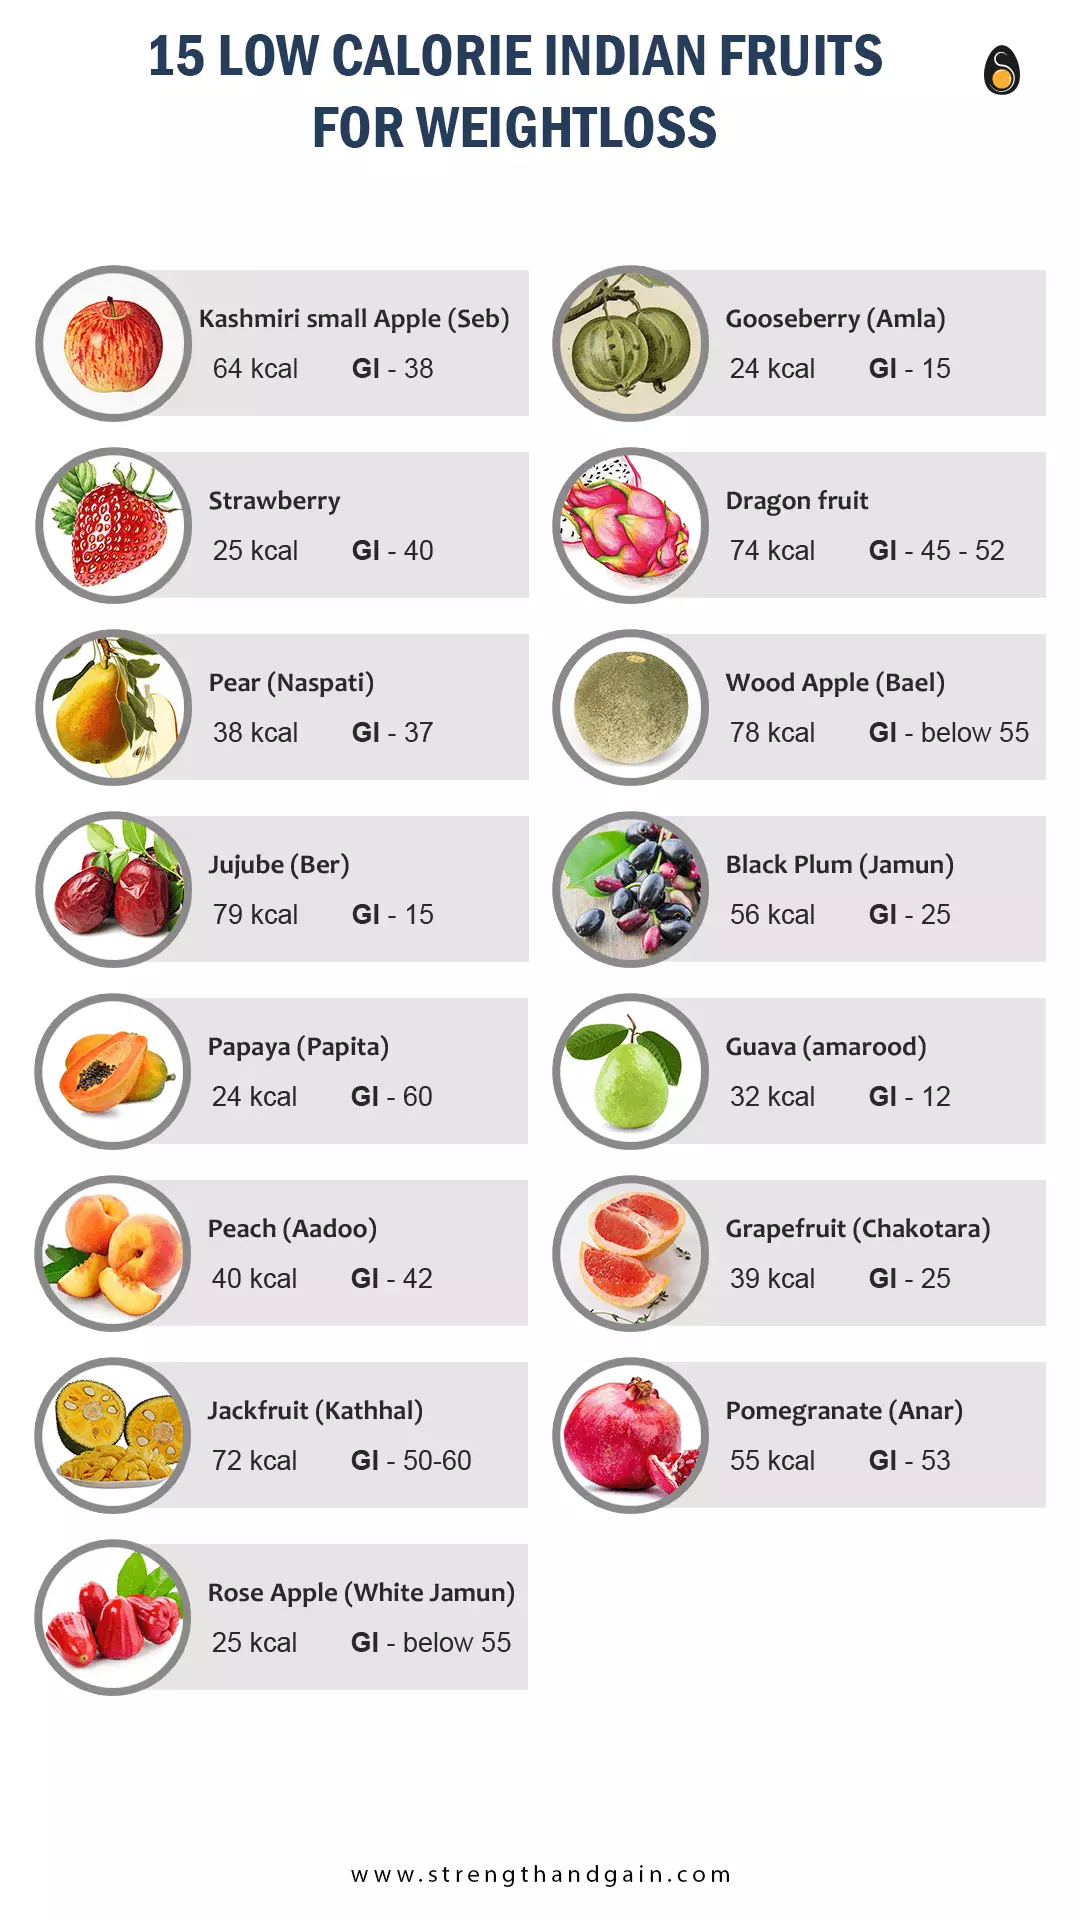 Infographic - List of 15 Low Calorie Indian Fruit